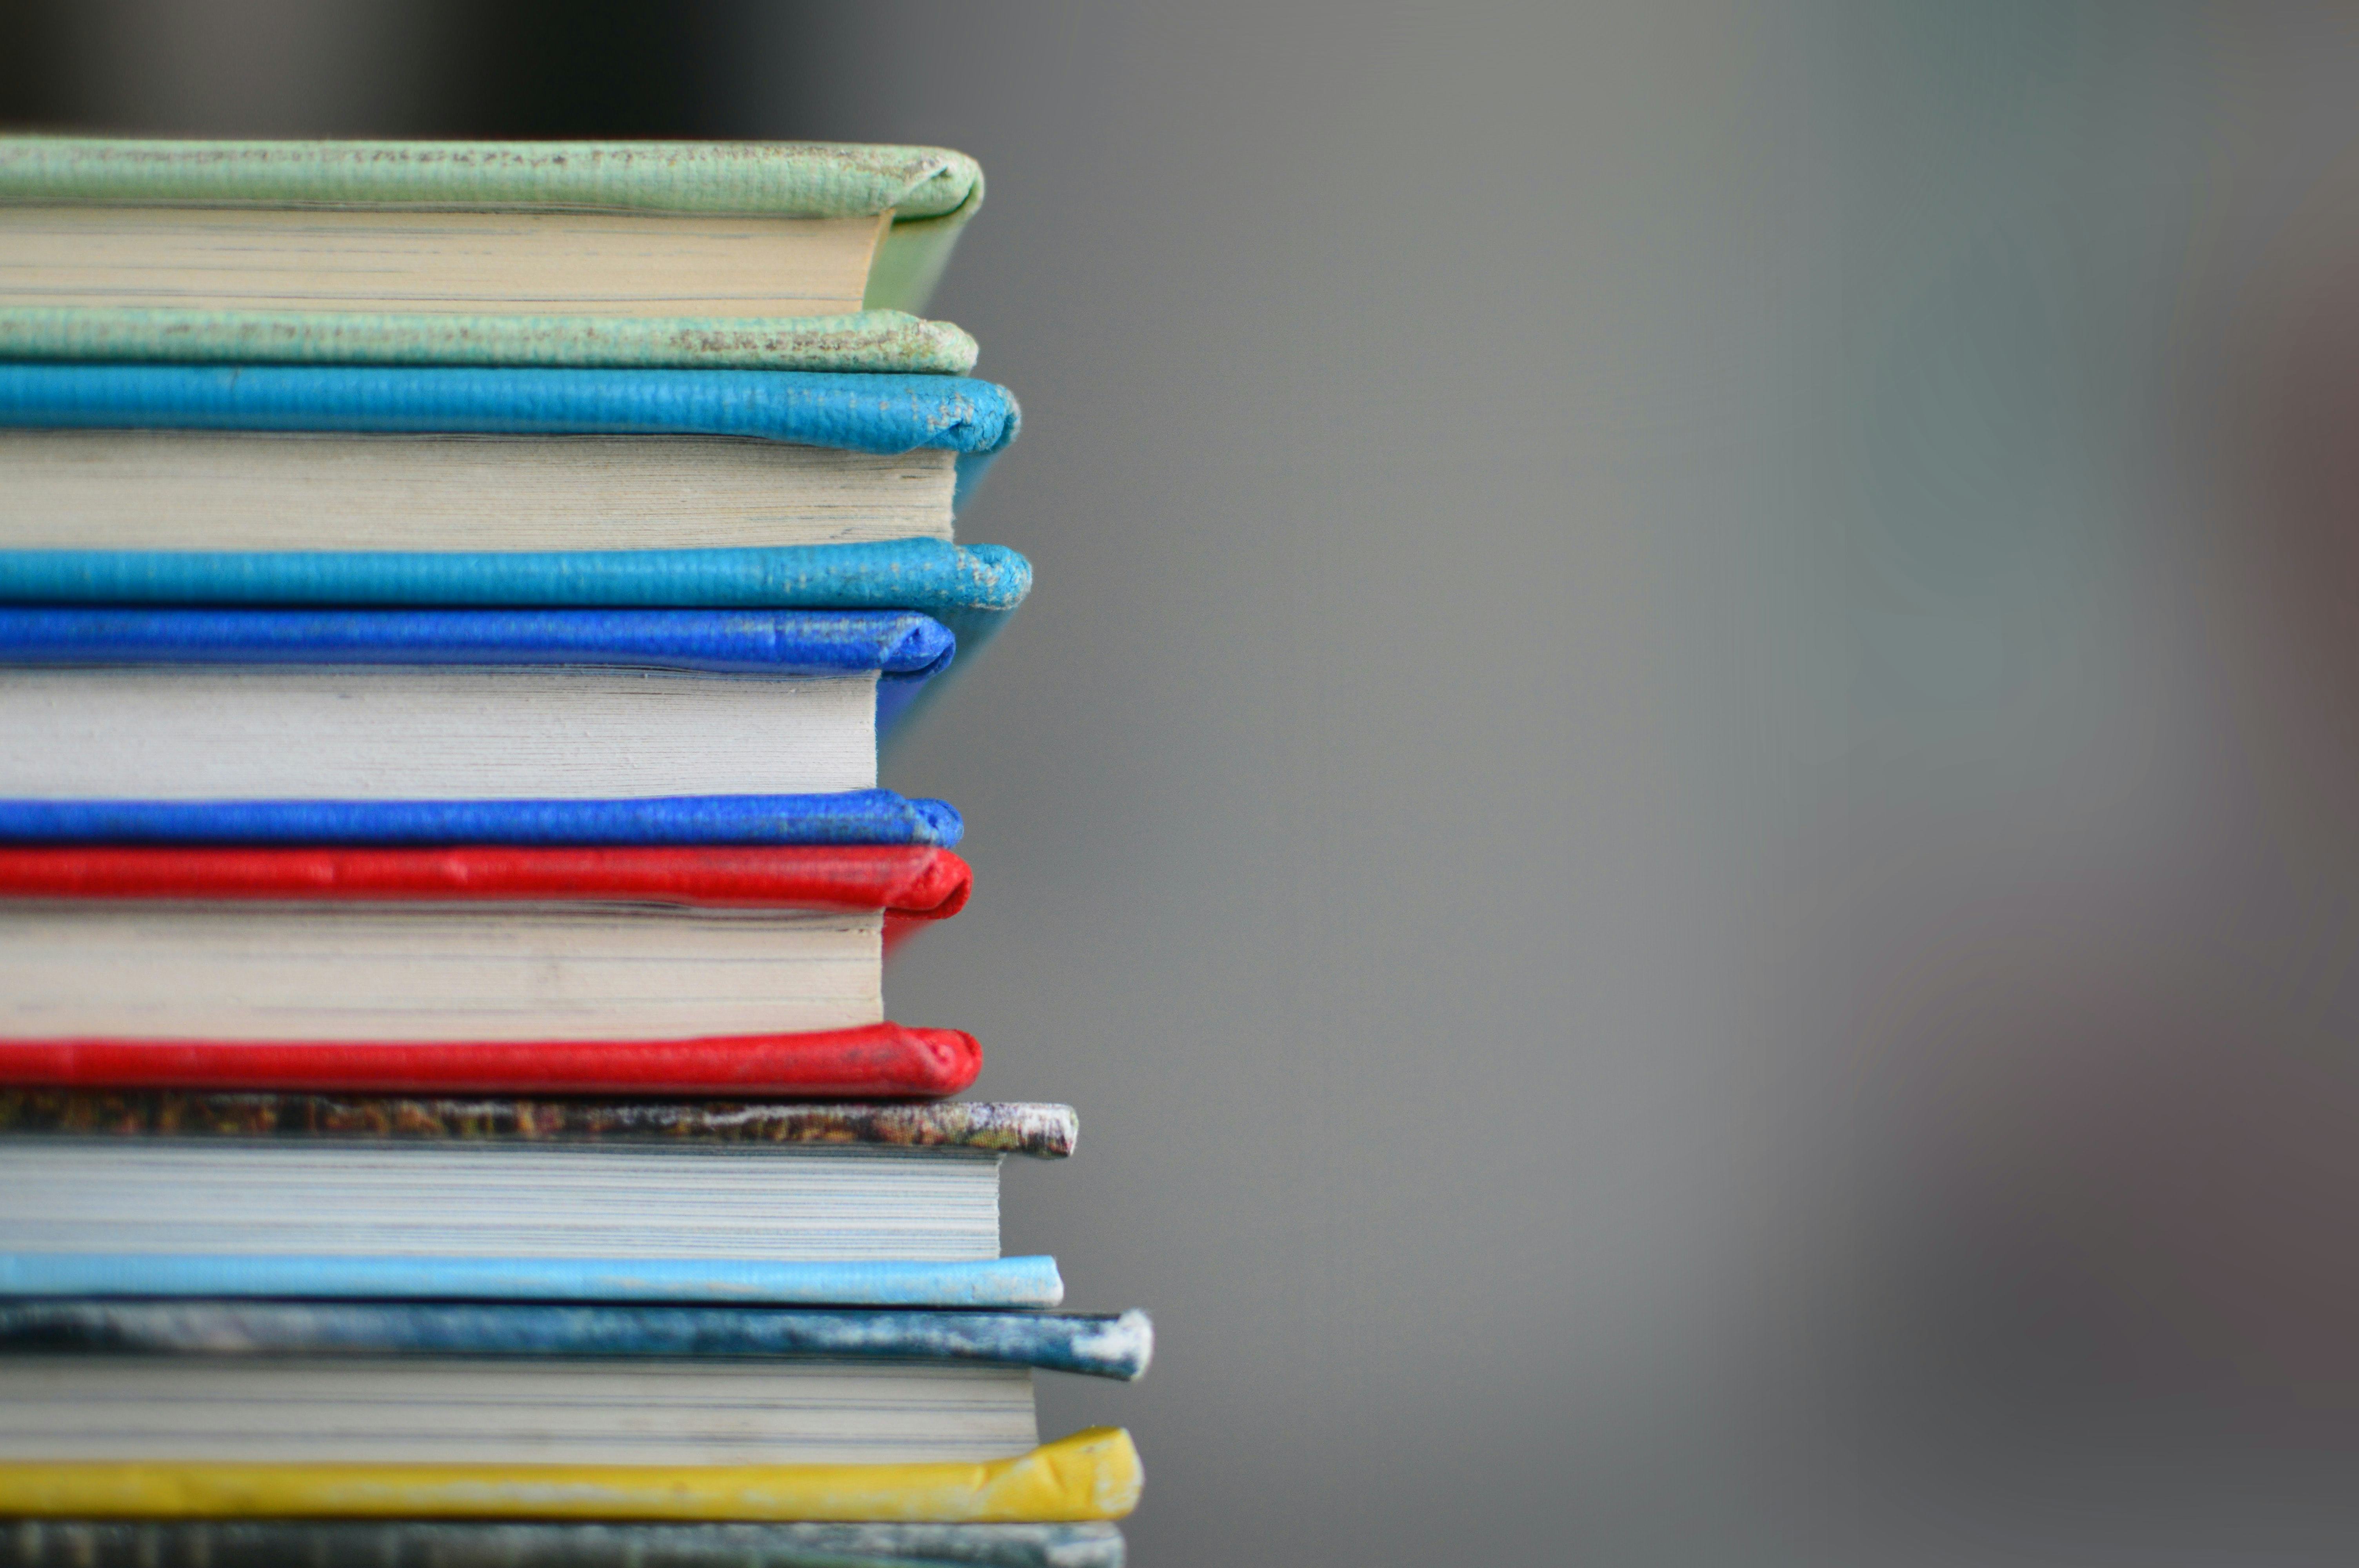 Image of a stack of books